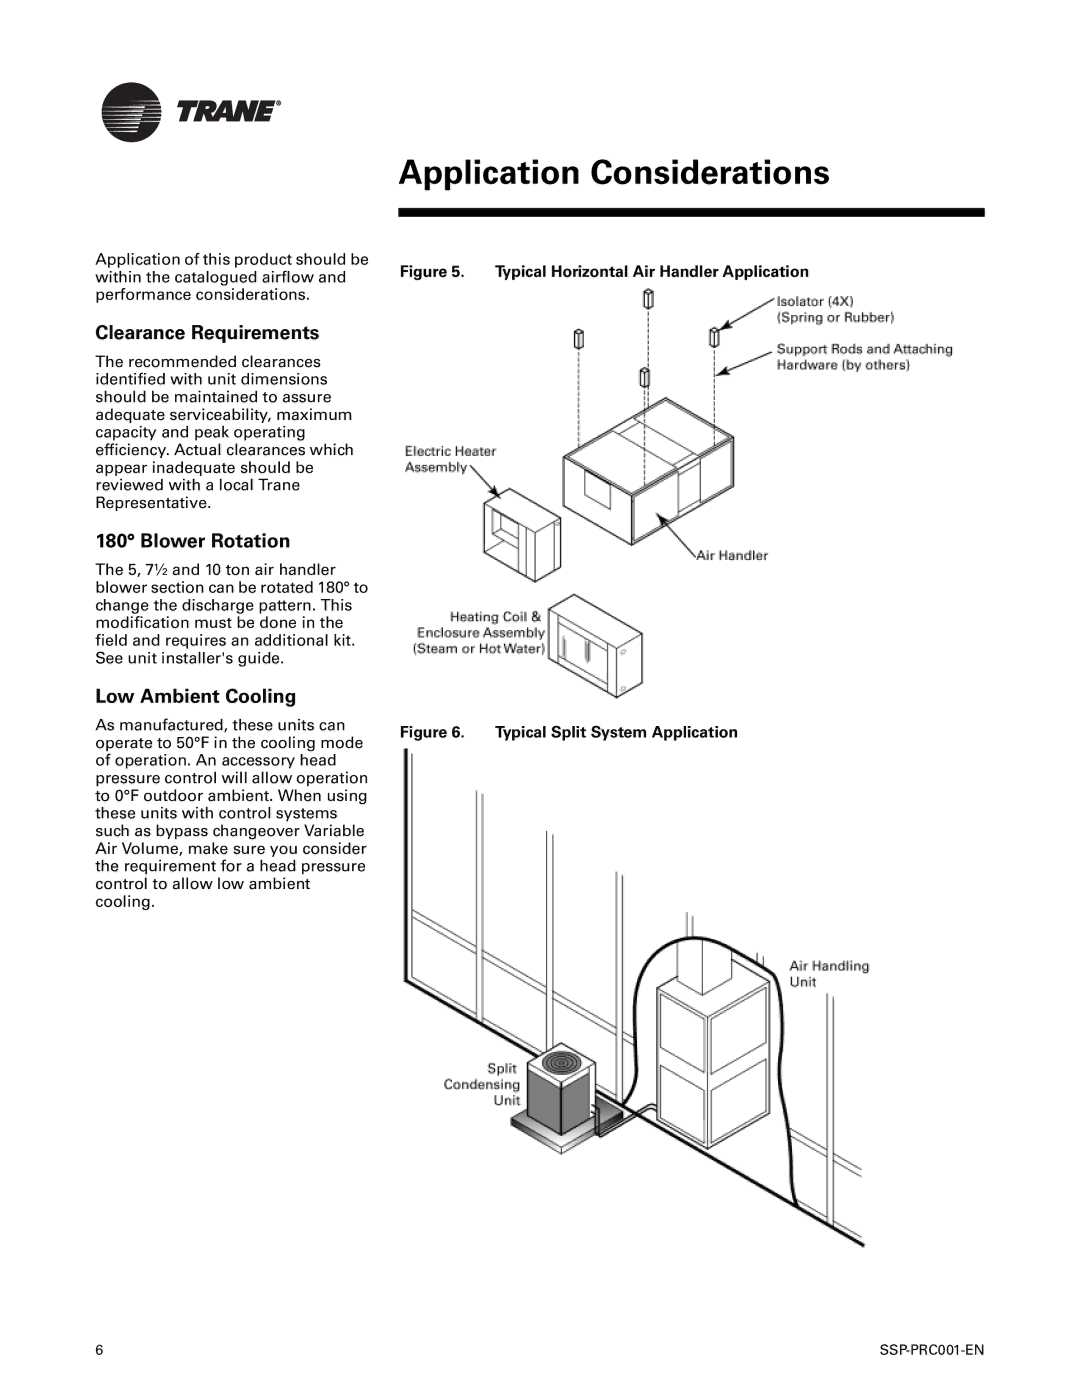 Trane SSP-PRC001-EN manual Application Considerations, Clearance Requirements, Blower Rotation, Low Ambient Cooling 